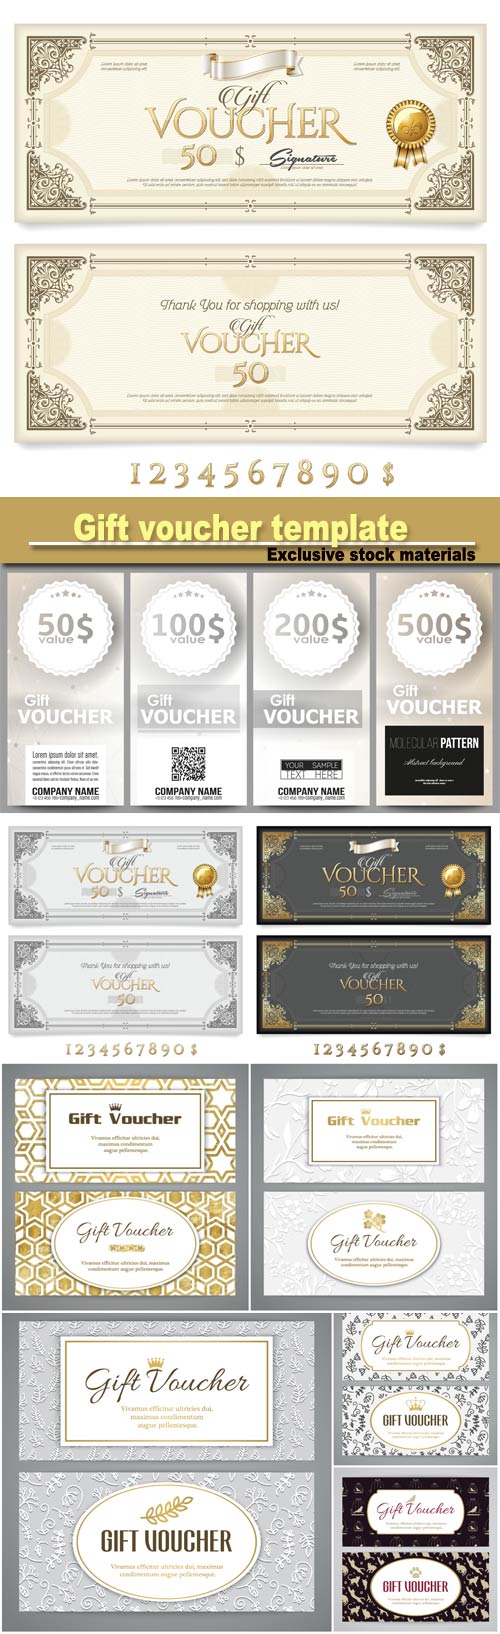 Gift voucher template with doodle pattern